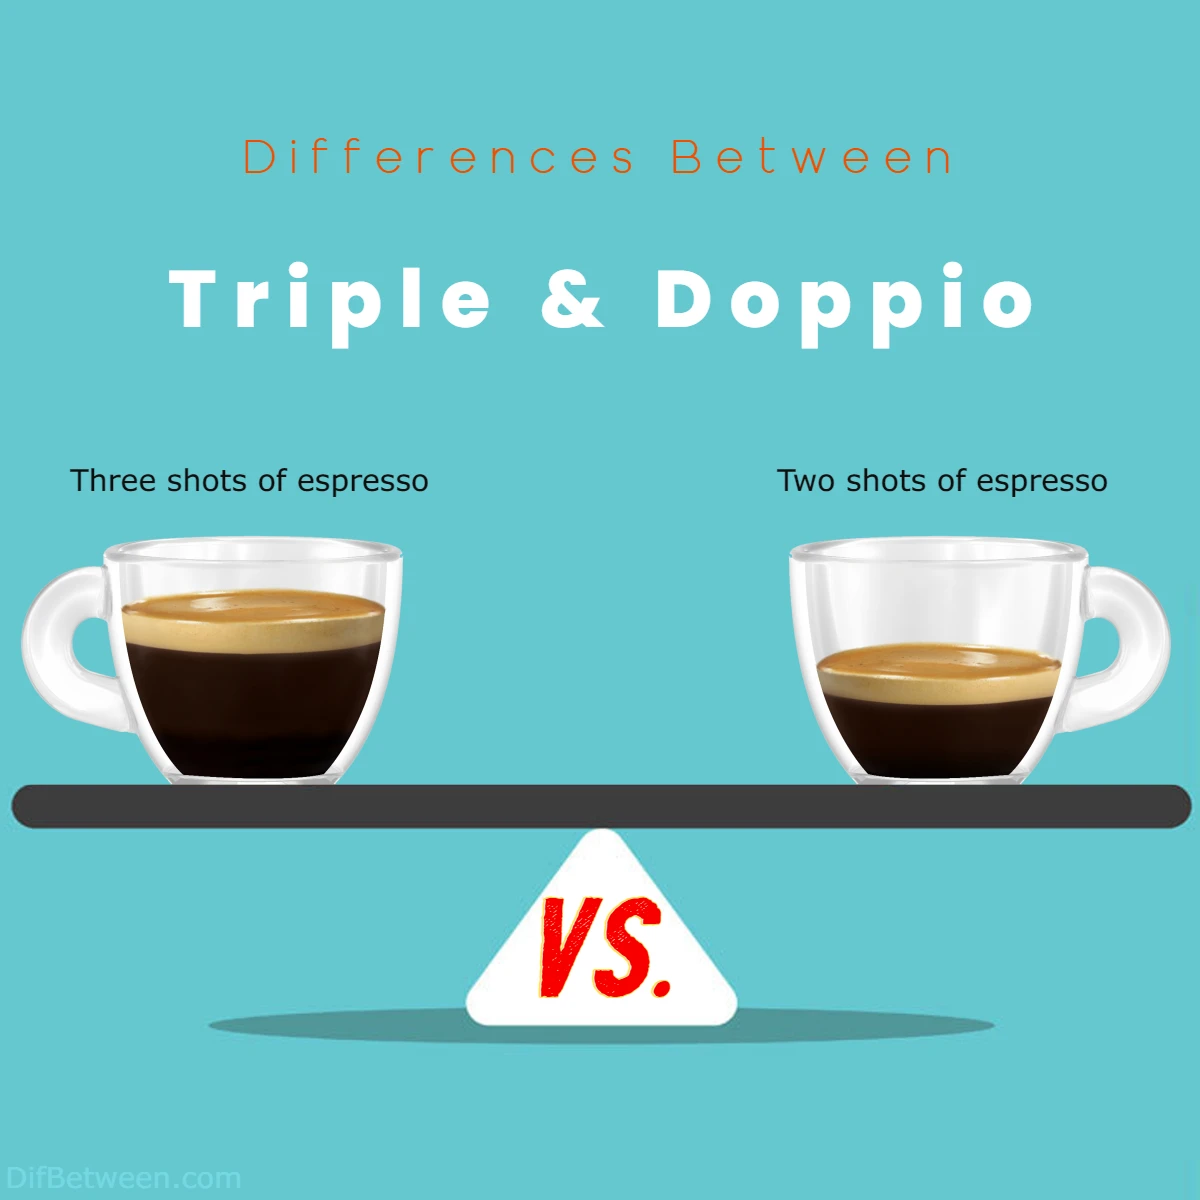 Differences Between Doppio and Triple